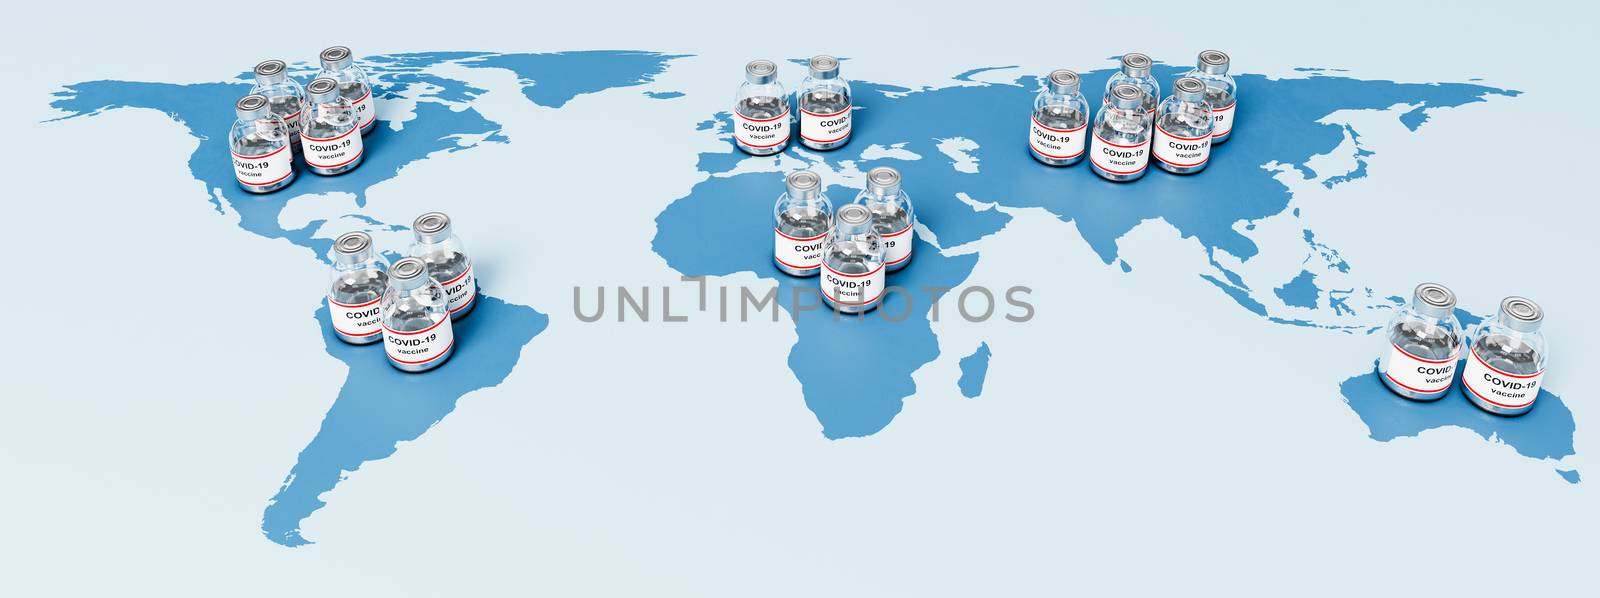 World Map with Many Coronavirus Vaccine Bottles 3D Illustration, Vaccine Global Production, Availability and Distribution Concept